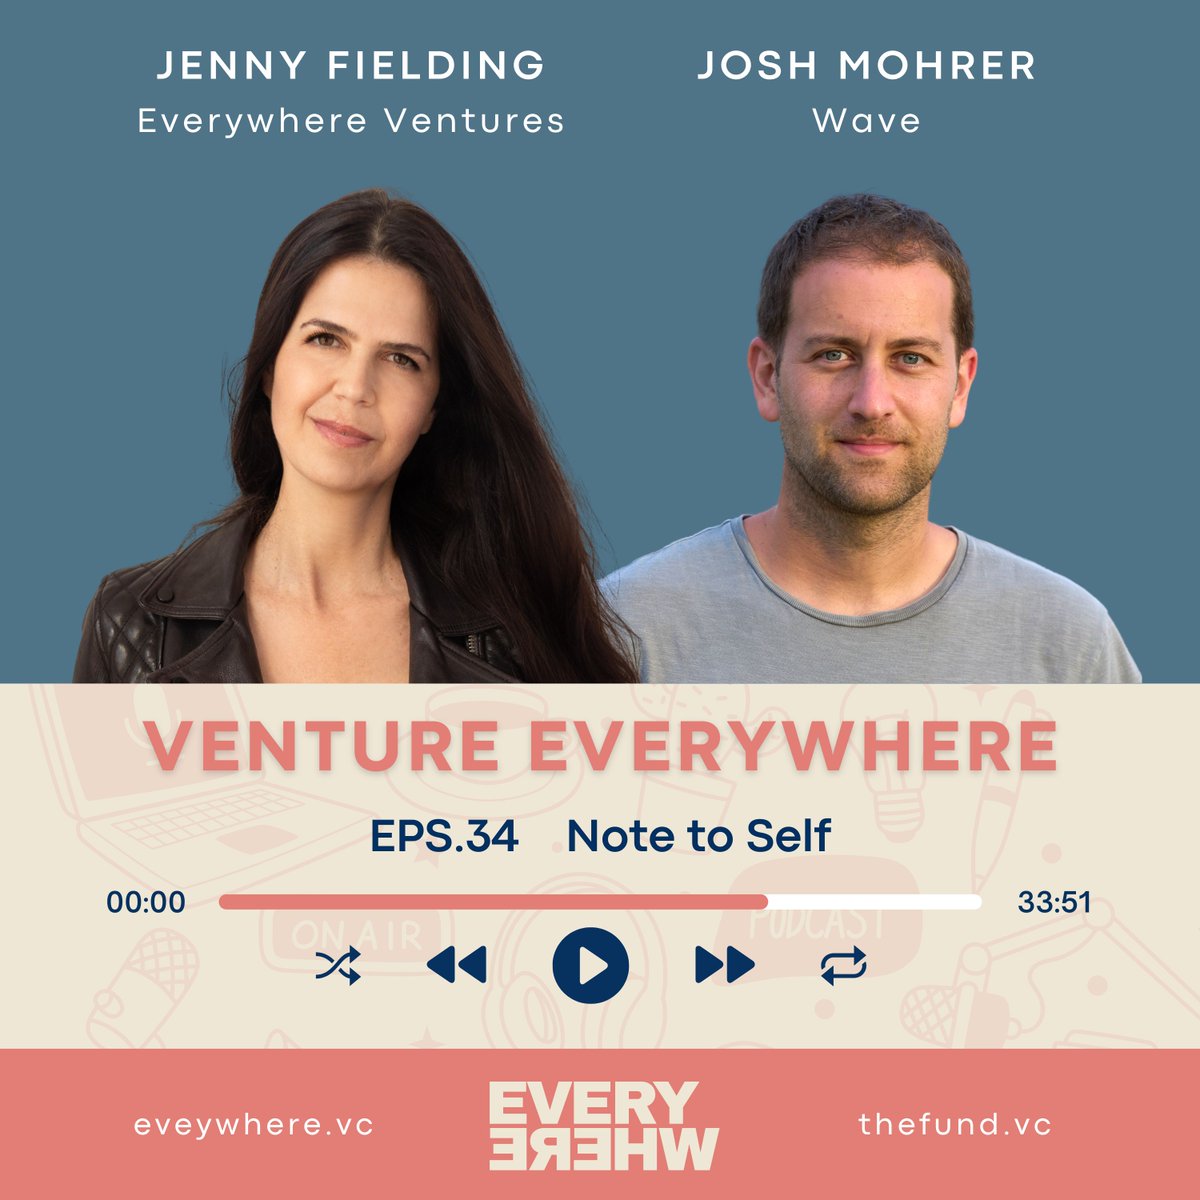 ON AIR: Venture Everywhere #Podcast EPS 34🎙️ Note to Self with @jefielding of @EverywhereVC and @joshmohrer of @waveappai 🎧Listen: 🍎 Apple: podcasts.apple.com/us/podcast/not… 💚 Spotify: open.spotify.com/episode/3fh9Ff… 🗒️ Transcript at ideas.everywhere.vc/s/podcast ideas.everywhere.vc/p/podcast-josh…